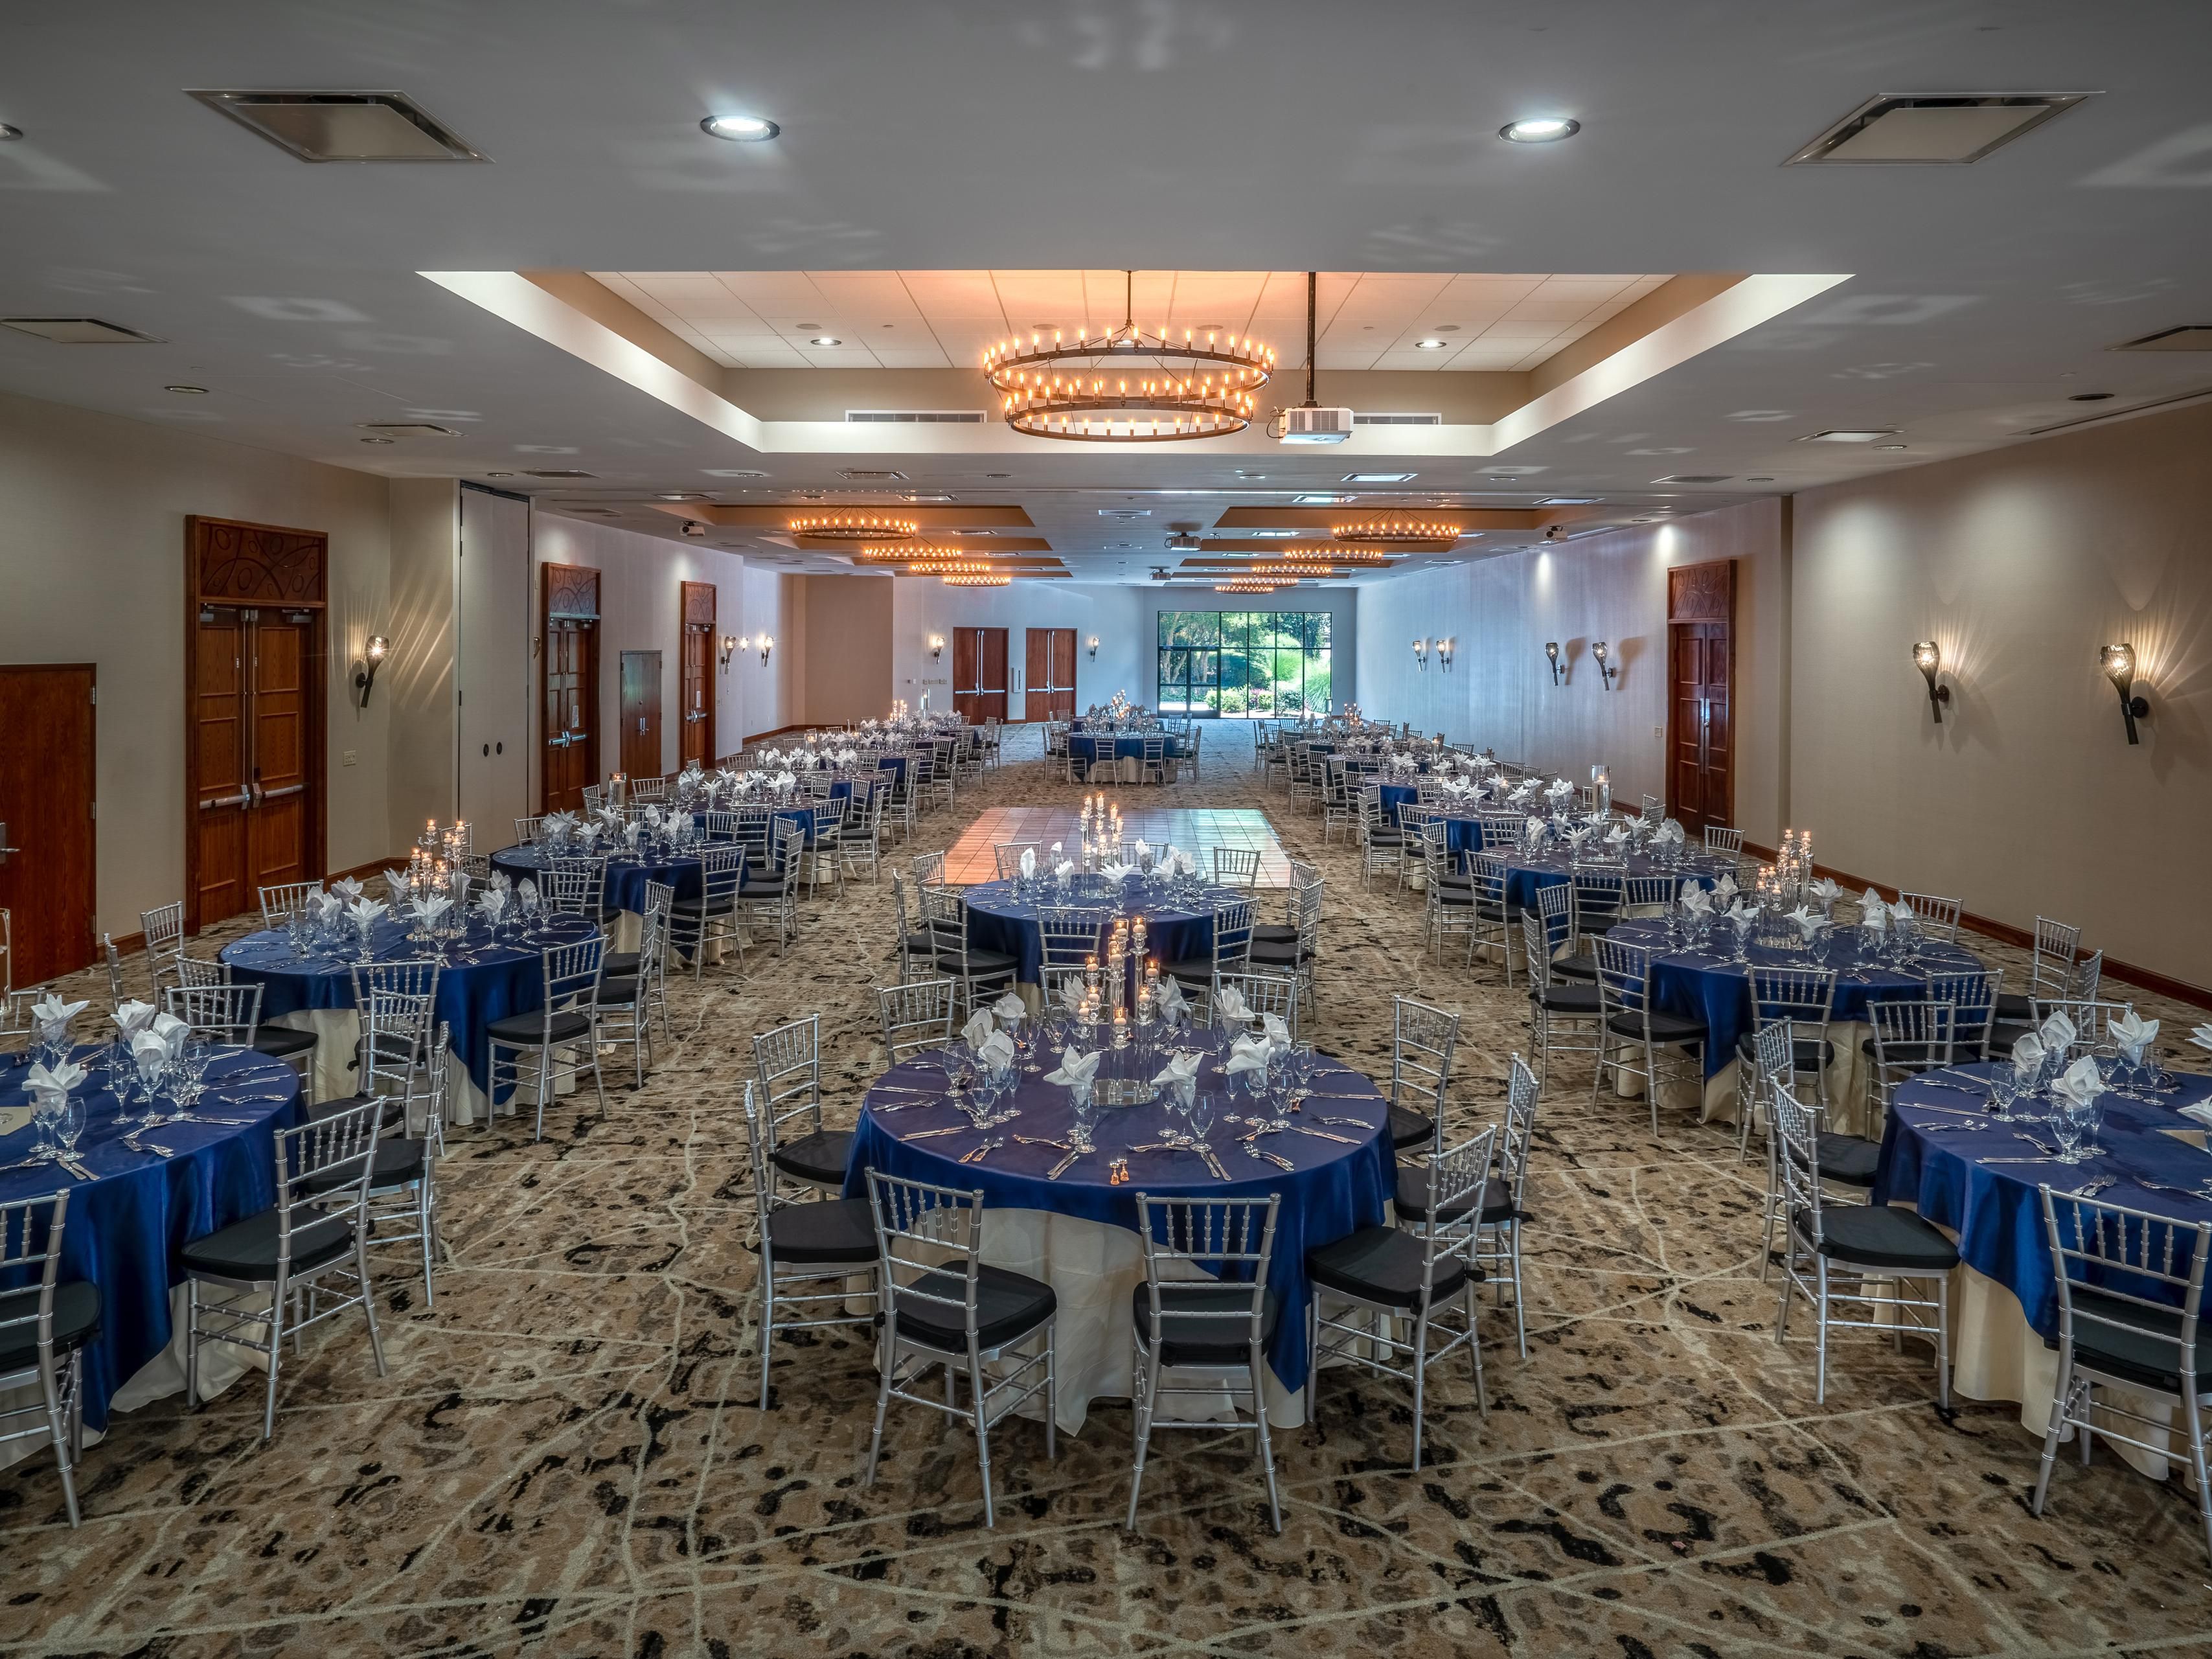 With 48 IACC certified meeting rooms we’re sure to have the right space for your next meeting or event. Our facility features our 7,800 square foot ballroom, our 5,040 square foot ballroom and breakout rooms to accommodate groups of 6 to 800.